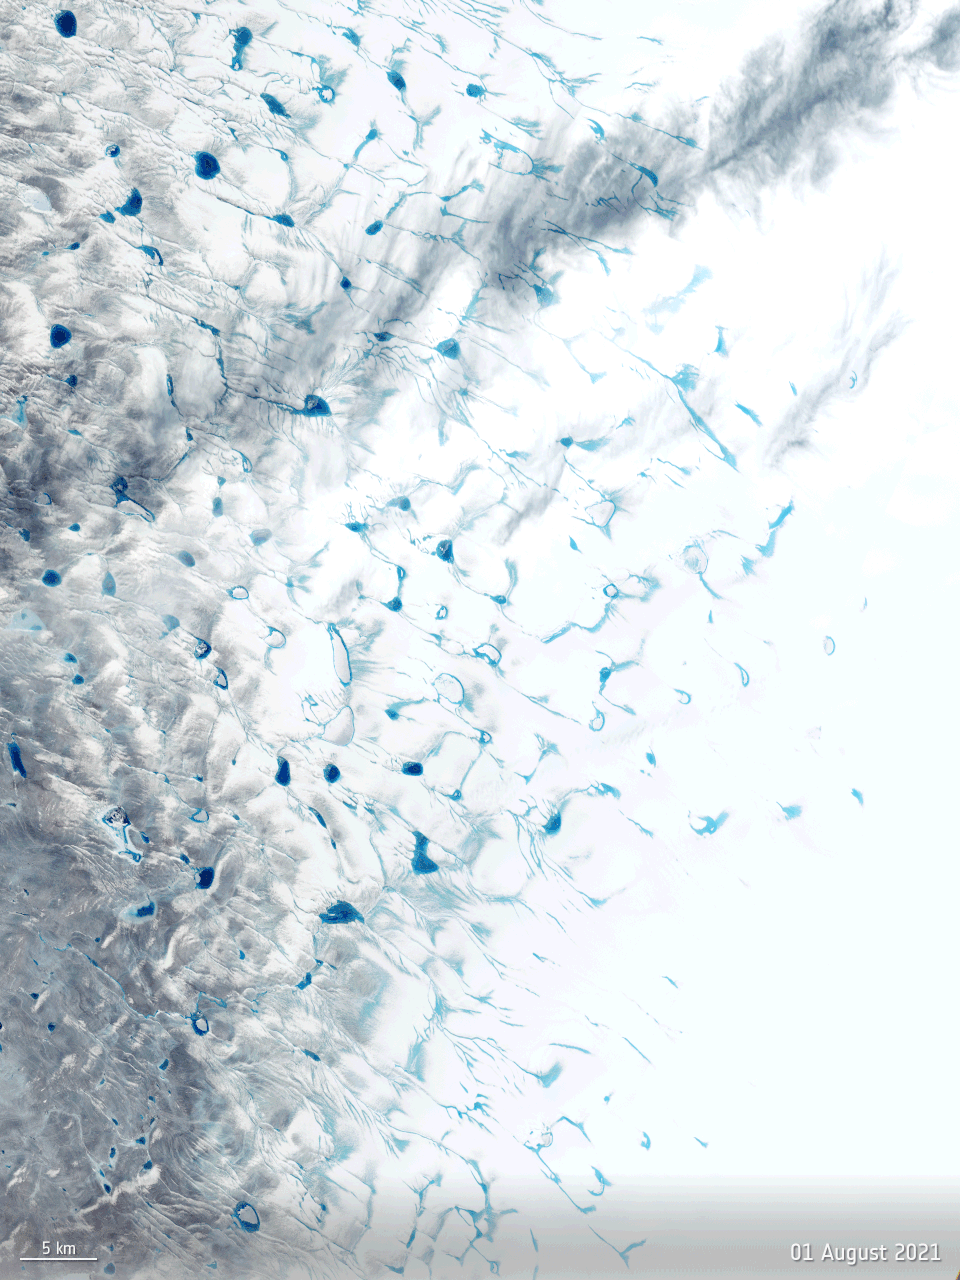 Figure 18: Meltwater and surface lakes on the Greenland ice sheet. For the first time ever recorded, in the late summer of 2021, rain fell on the high central area of the Greenland ice sheet. This extraordinary event was preceded by a heatwave and followed by the surface snow and ice rapidly melting. The animation is a series of five images captured by the Copernicus Sentinel-2 mission and shows how the surface of the ice sheet changed between on 1, 3 5, 20 and 23 August 2021. The melt, which also created lakes on the surface of the ice, is clear to see. Researchers, supported by ESA’s Science for Society programme, discovered that it wasn’t actually the rain that caused the melt, it was unusually warm ‘atmospheric rivers’ that swept along Greenland, bringing potent melt conditions when the melt season would normally be drawing to a close (image credit: ESA, the image contains modified Copernicus Sentinel data (2021), processed by ESA)